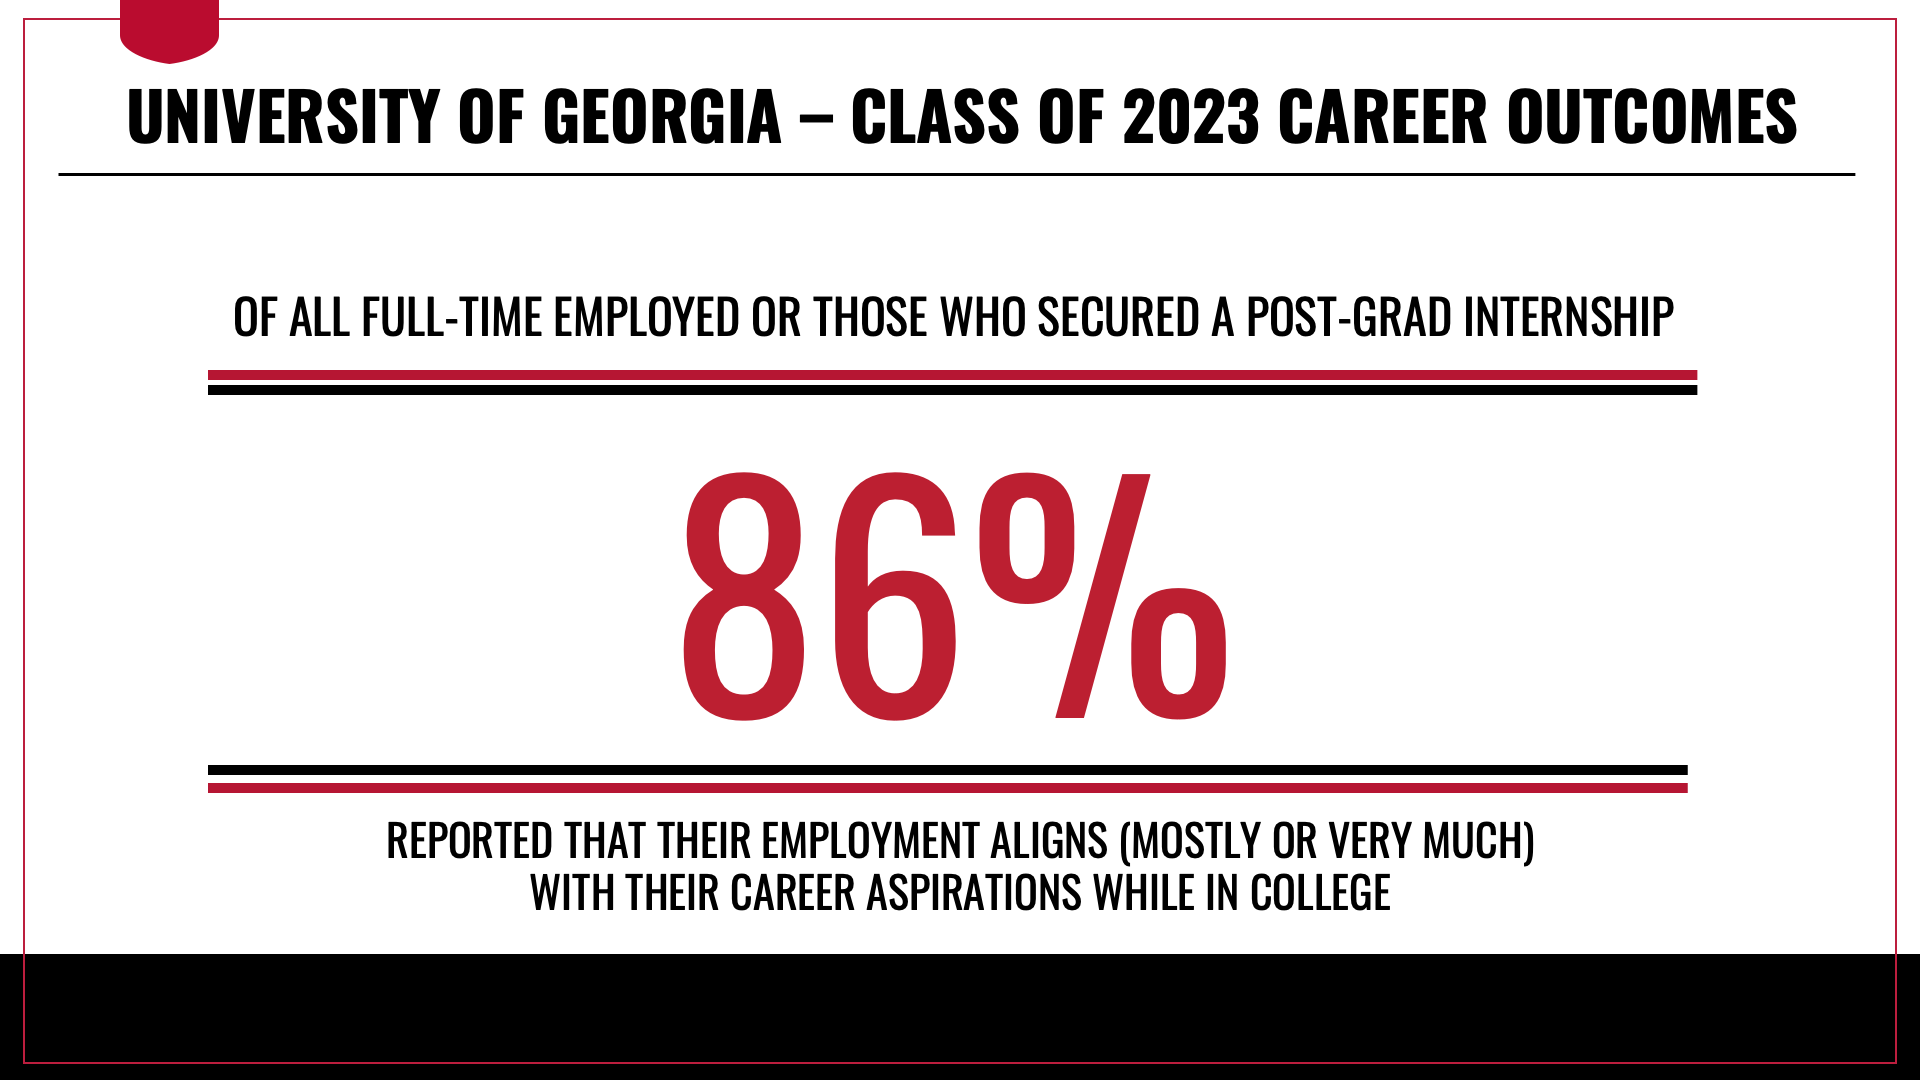 OF ALL FULL-TIME EMPLOYED UGA CLASS OF 2023 GRADUATES, OR THOSE WHO SECURED A POST-GRAD INTERNSHIP OR FELLOWSHIP, 86 PERCENT REPORTED THAT THEIR EMPLOYMENT ALIGNS (MOSTLY OR VERY MUCH) WITH THEIR CAREER ASPIRATIONS WHILE IN COLLEGE